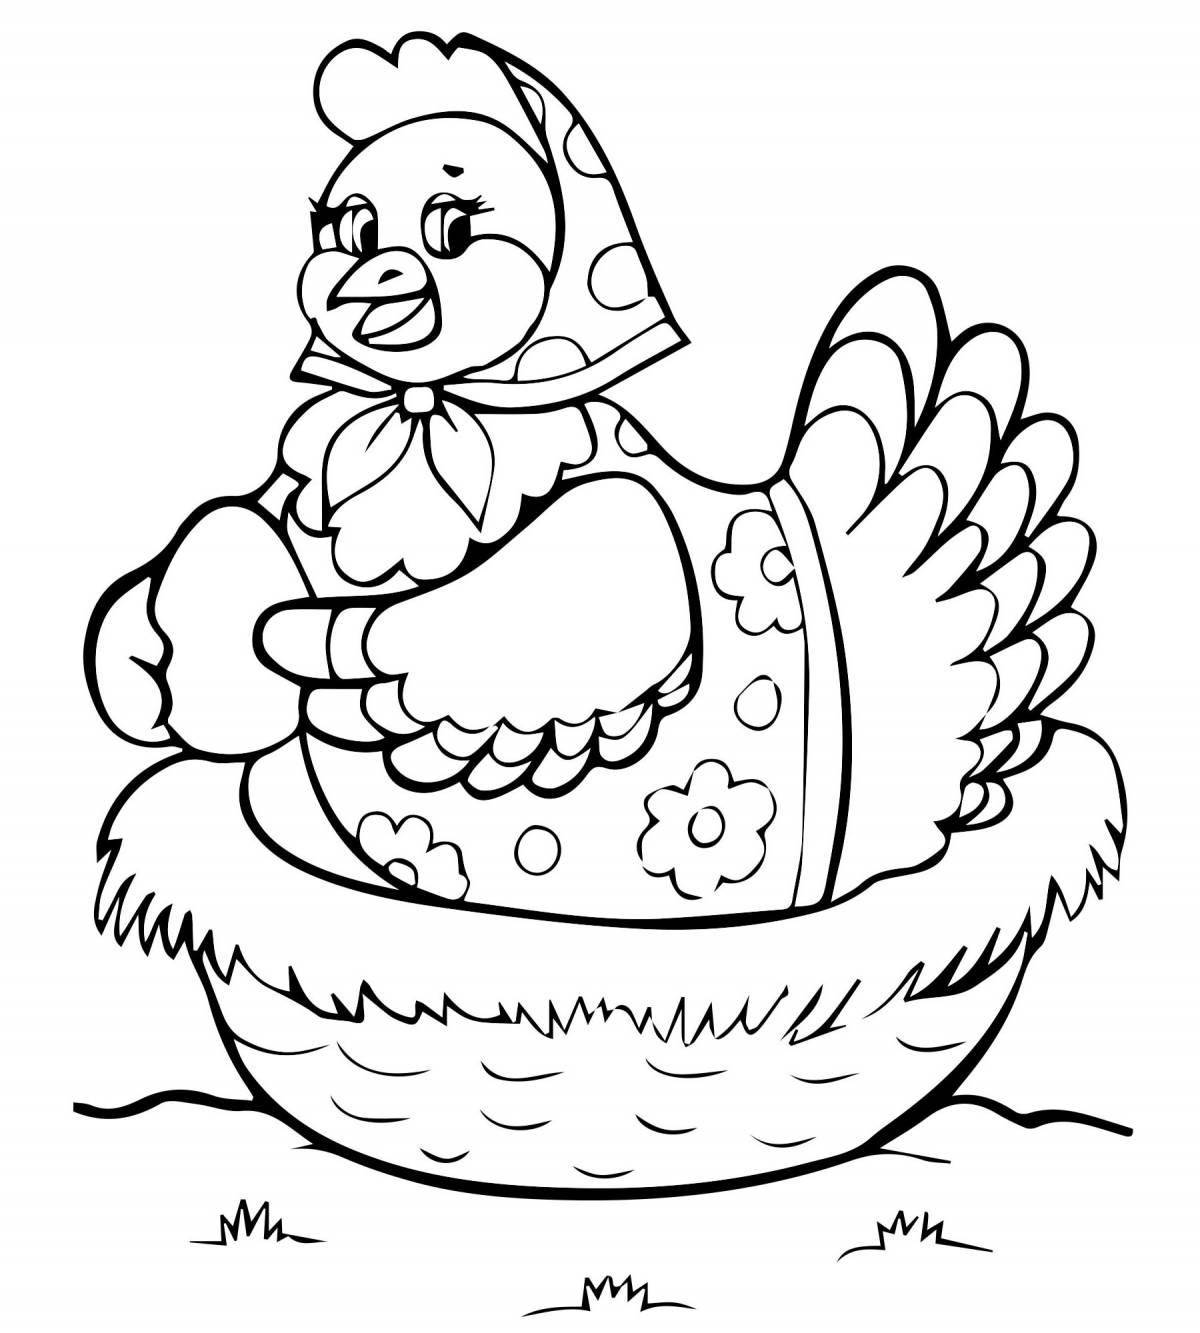 Heroic coloring pages heroes of Russian fairy tales